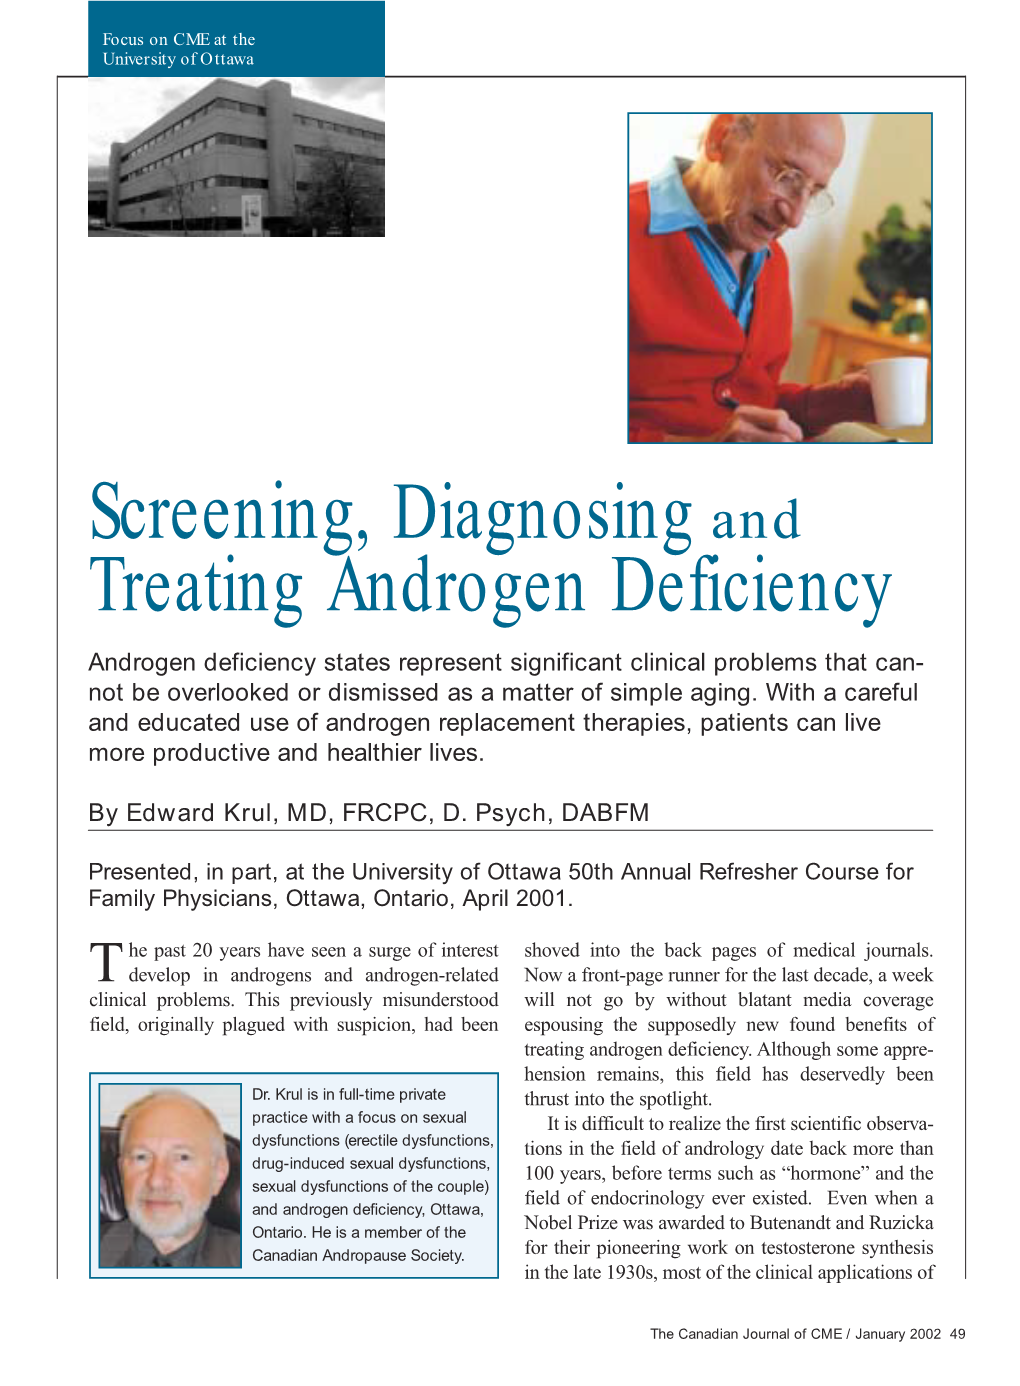 Screening, Diagnosing and Treating Androgen Deficiency